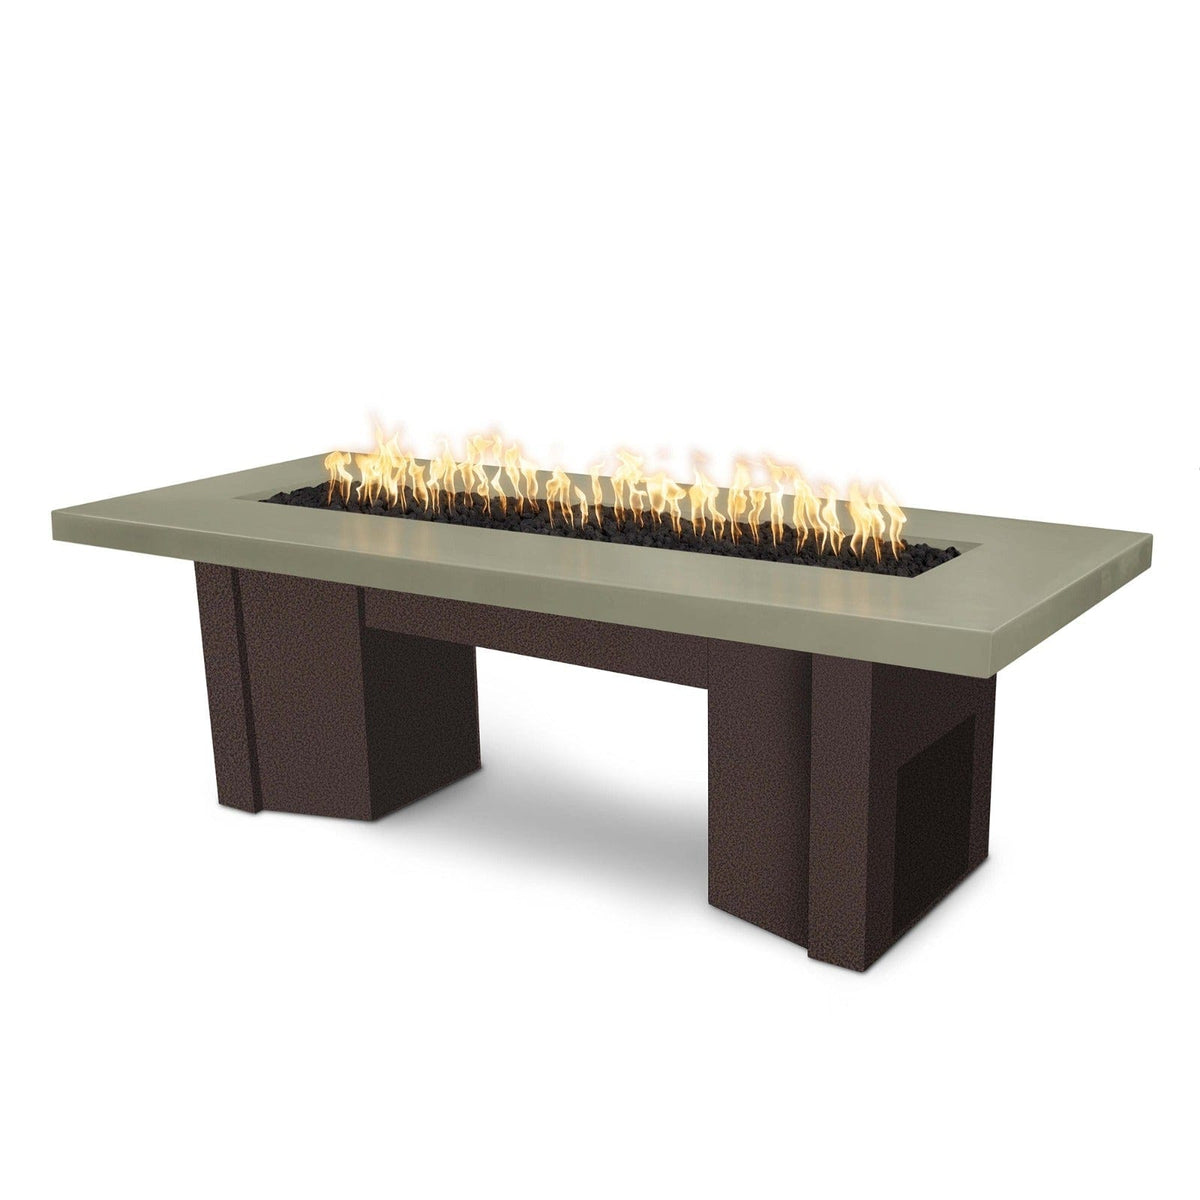 The Outdoor Plus Fire Features Ash (-ASH) / Copper Vein Powder Coated Steel (-CPV) The Outdoor Plus 78&quot; Alameda Fire Table Smooth Concrete in Natural Gas - Match Lit with Flame Sense System / OPT-ALMGFRC78FSML-NG